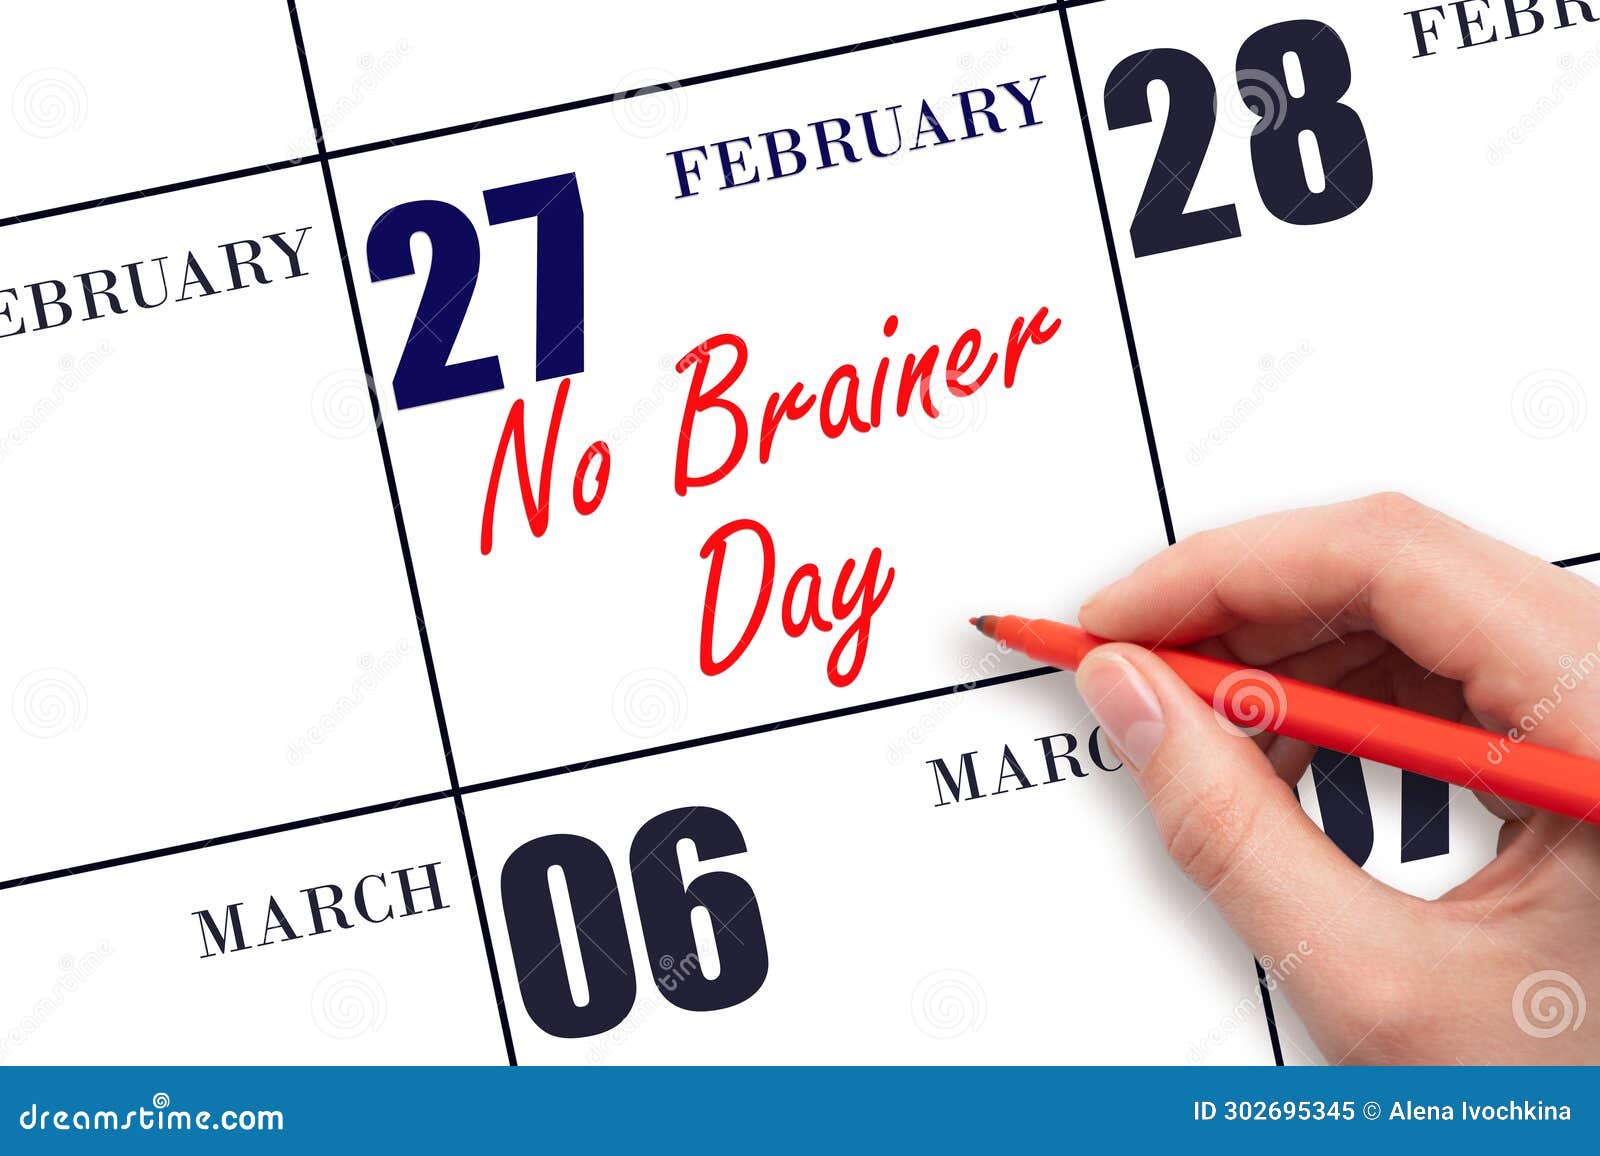 February 27. Hand Writing Text No Brainer Day on Calendar Date